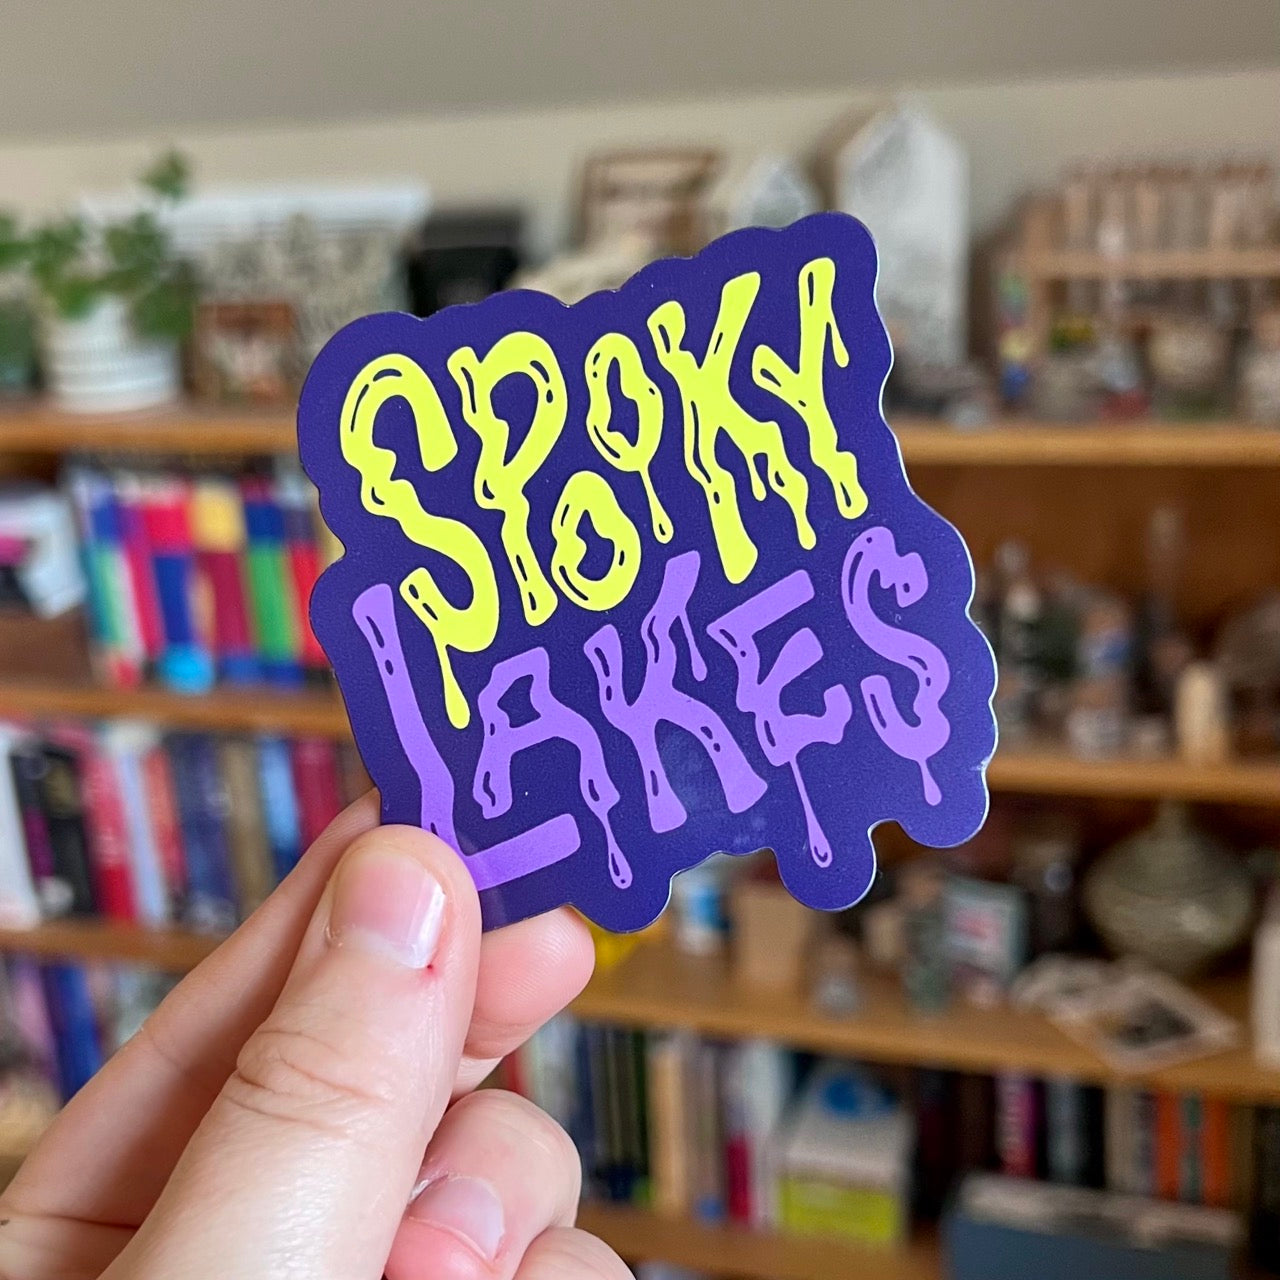 Spooky Lakes Magnet: 2023 Spooky Lake Month